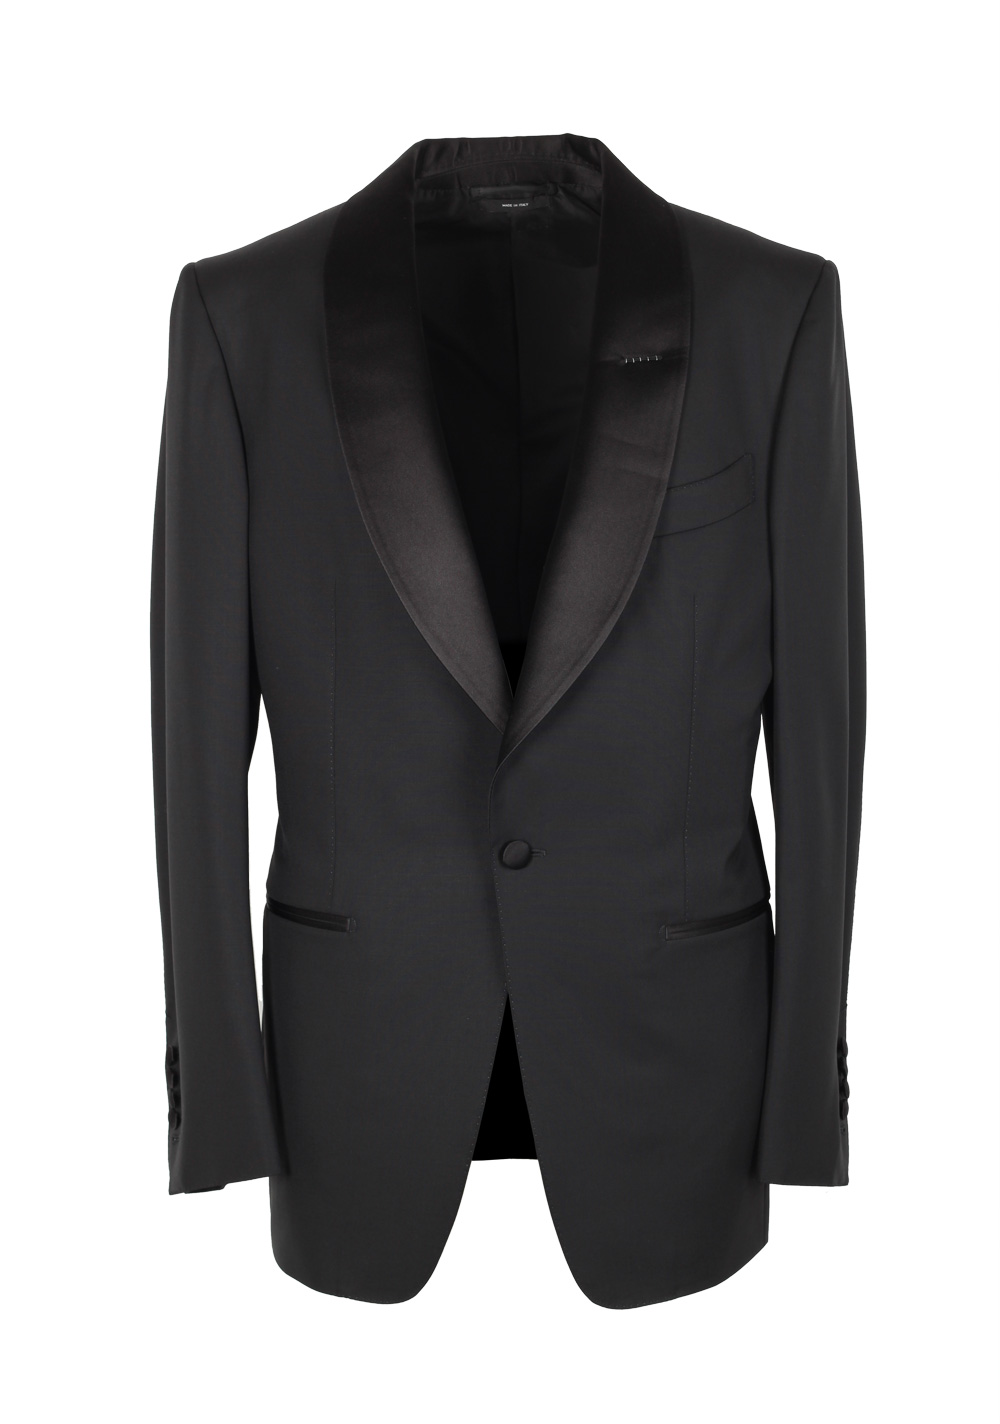 TOM FORD Windsor Shawl Collar Black Tuxedo Suit Smoking Size 48 / 38R U.S. Fit A | Costume Limité